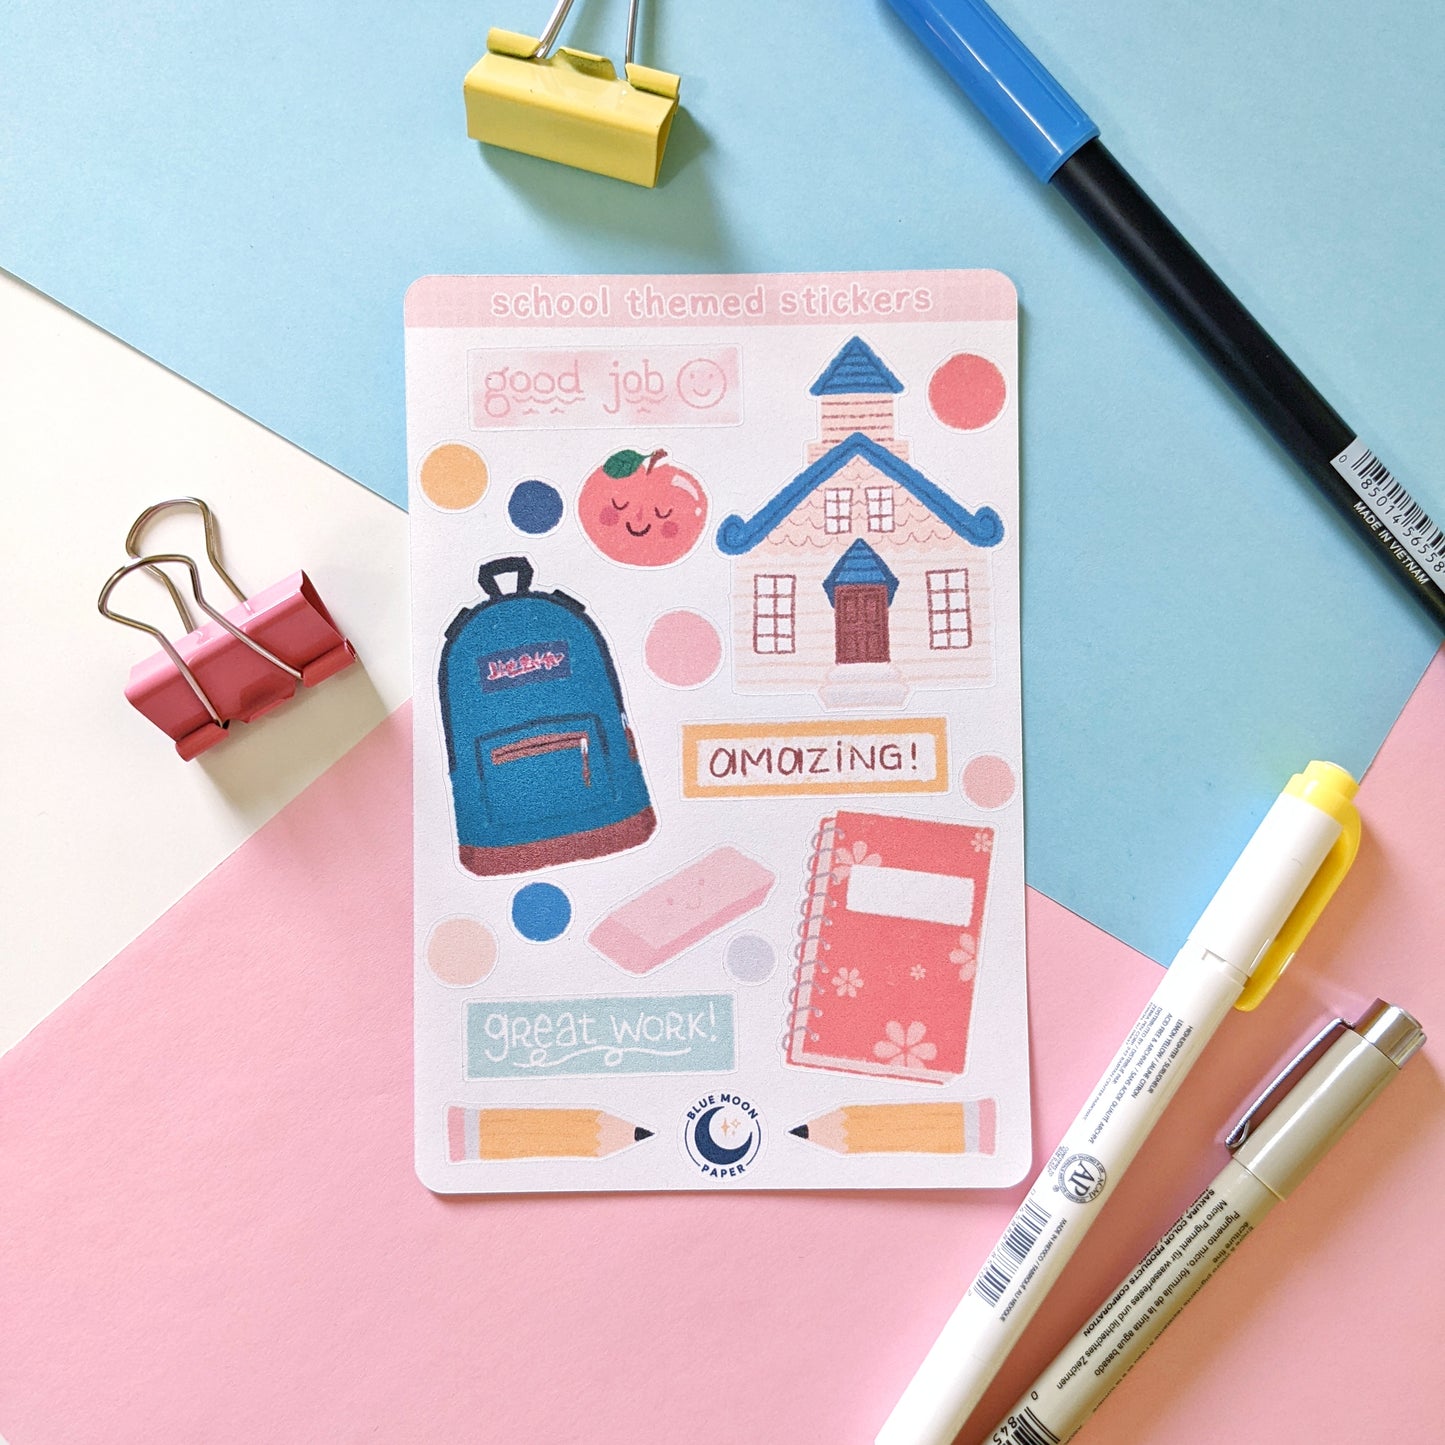 Sticker sheet featuring various school-themed items such as a schoolhouse, backpack, eraser, and pencils.